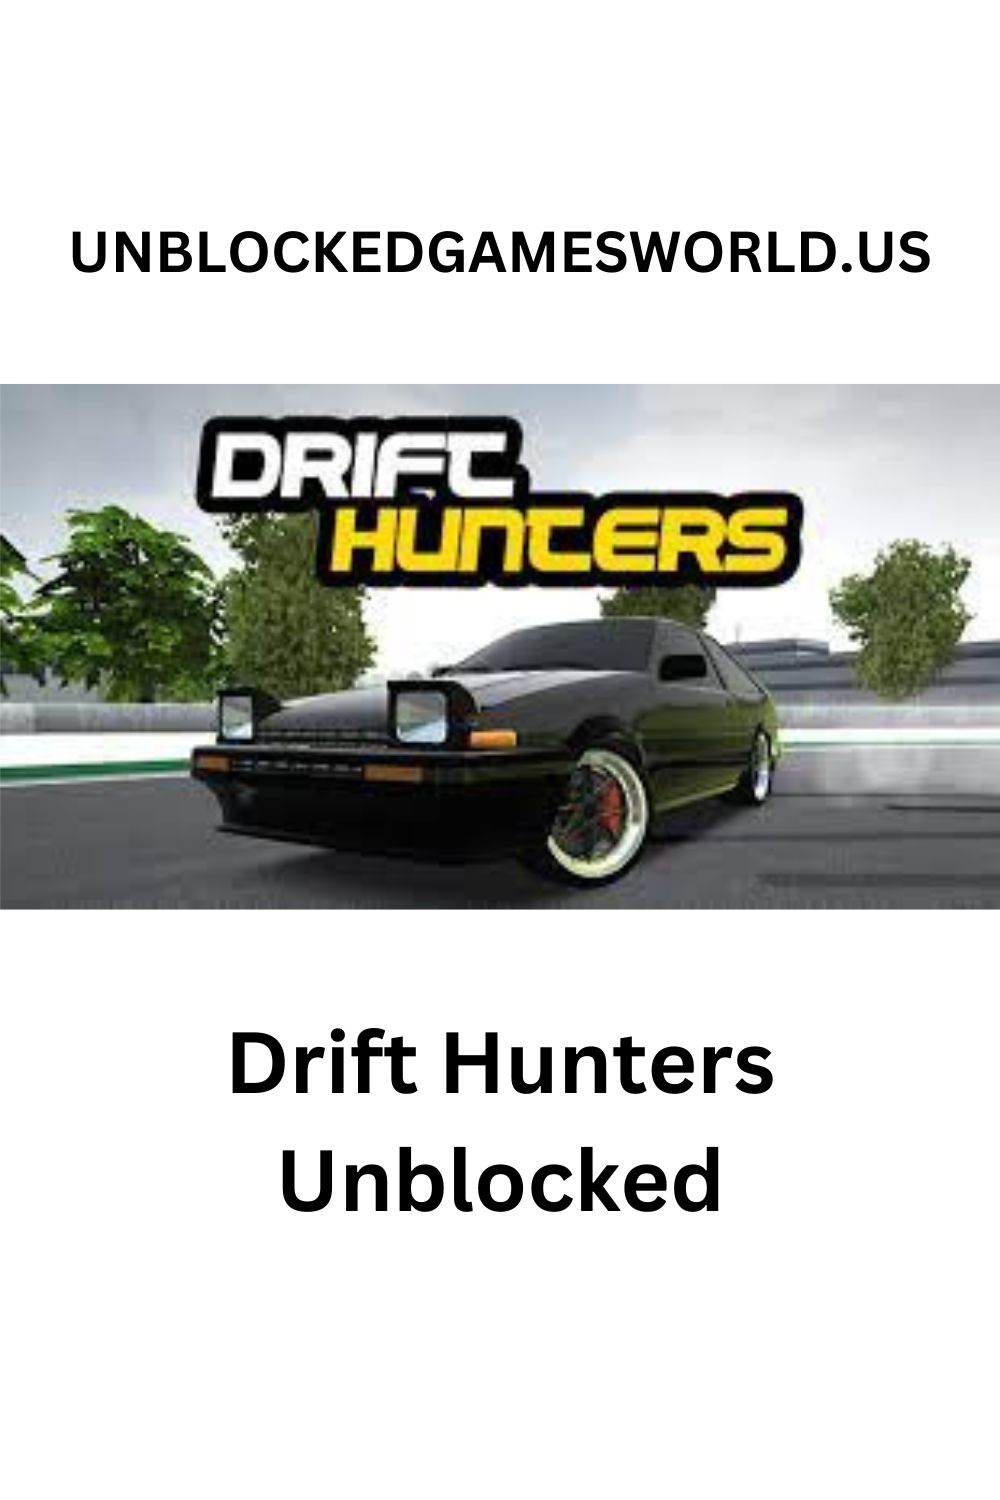 Drift Hunters Unblocked games  Play free games, Games, School games